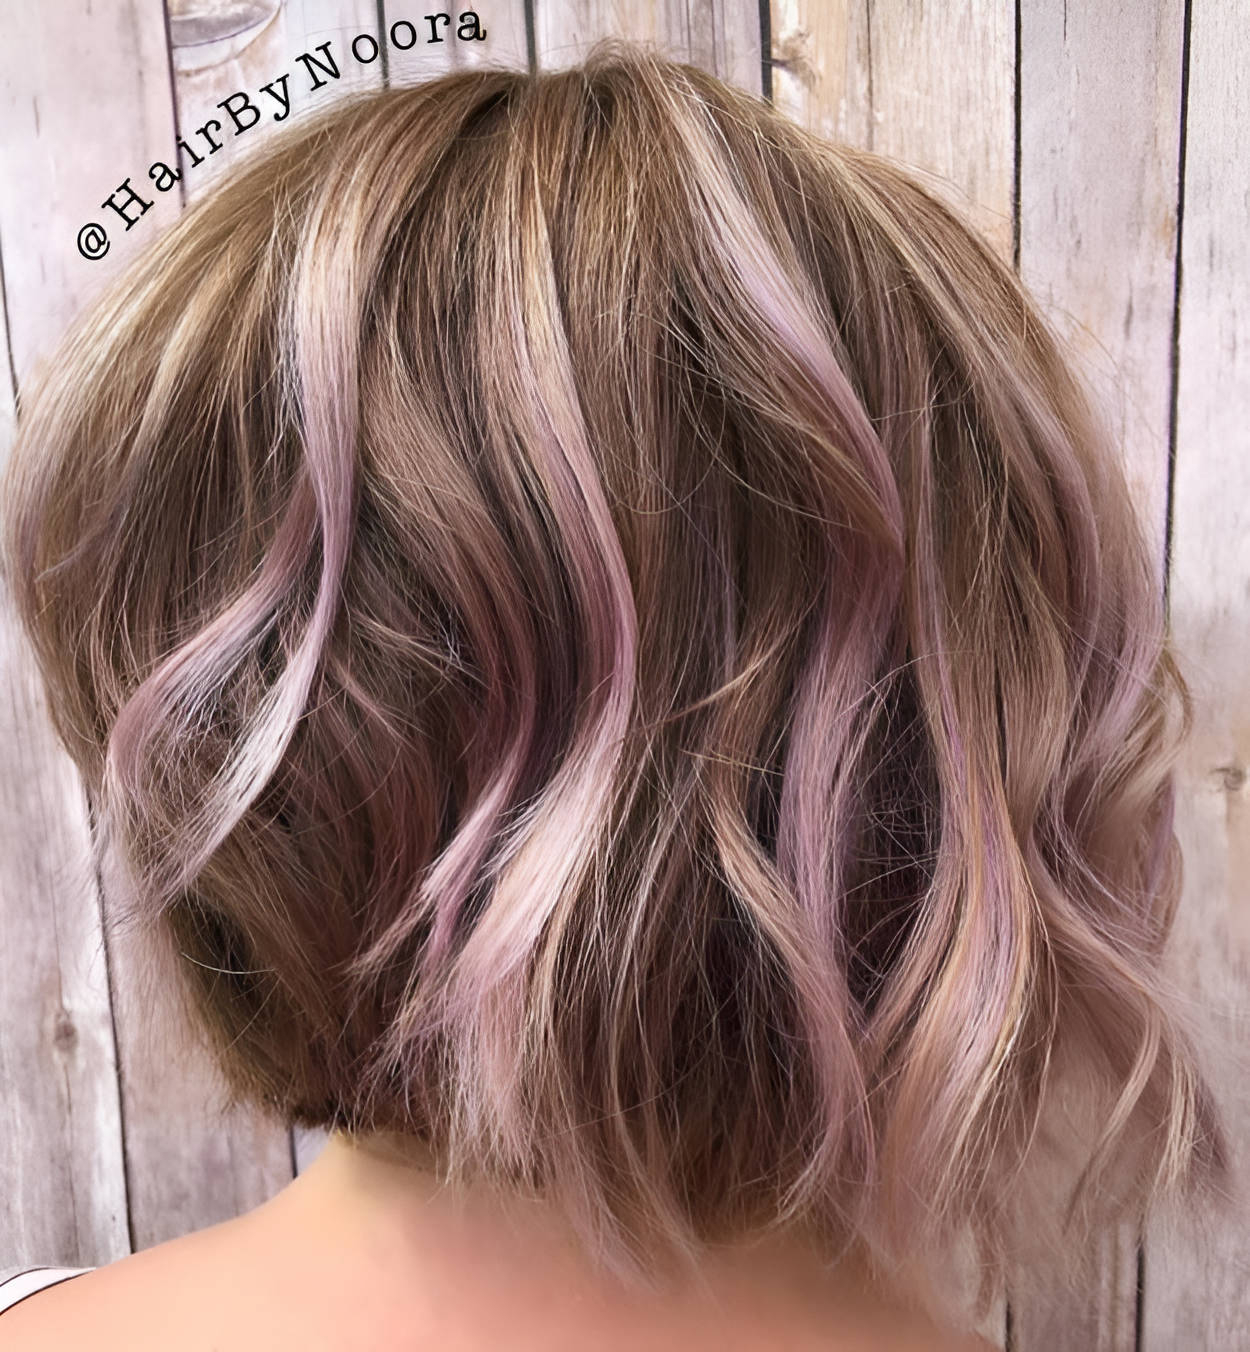 Honey Balayage Short Hair With A Hint Of Purple